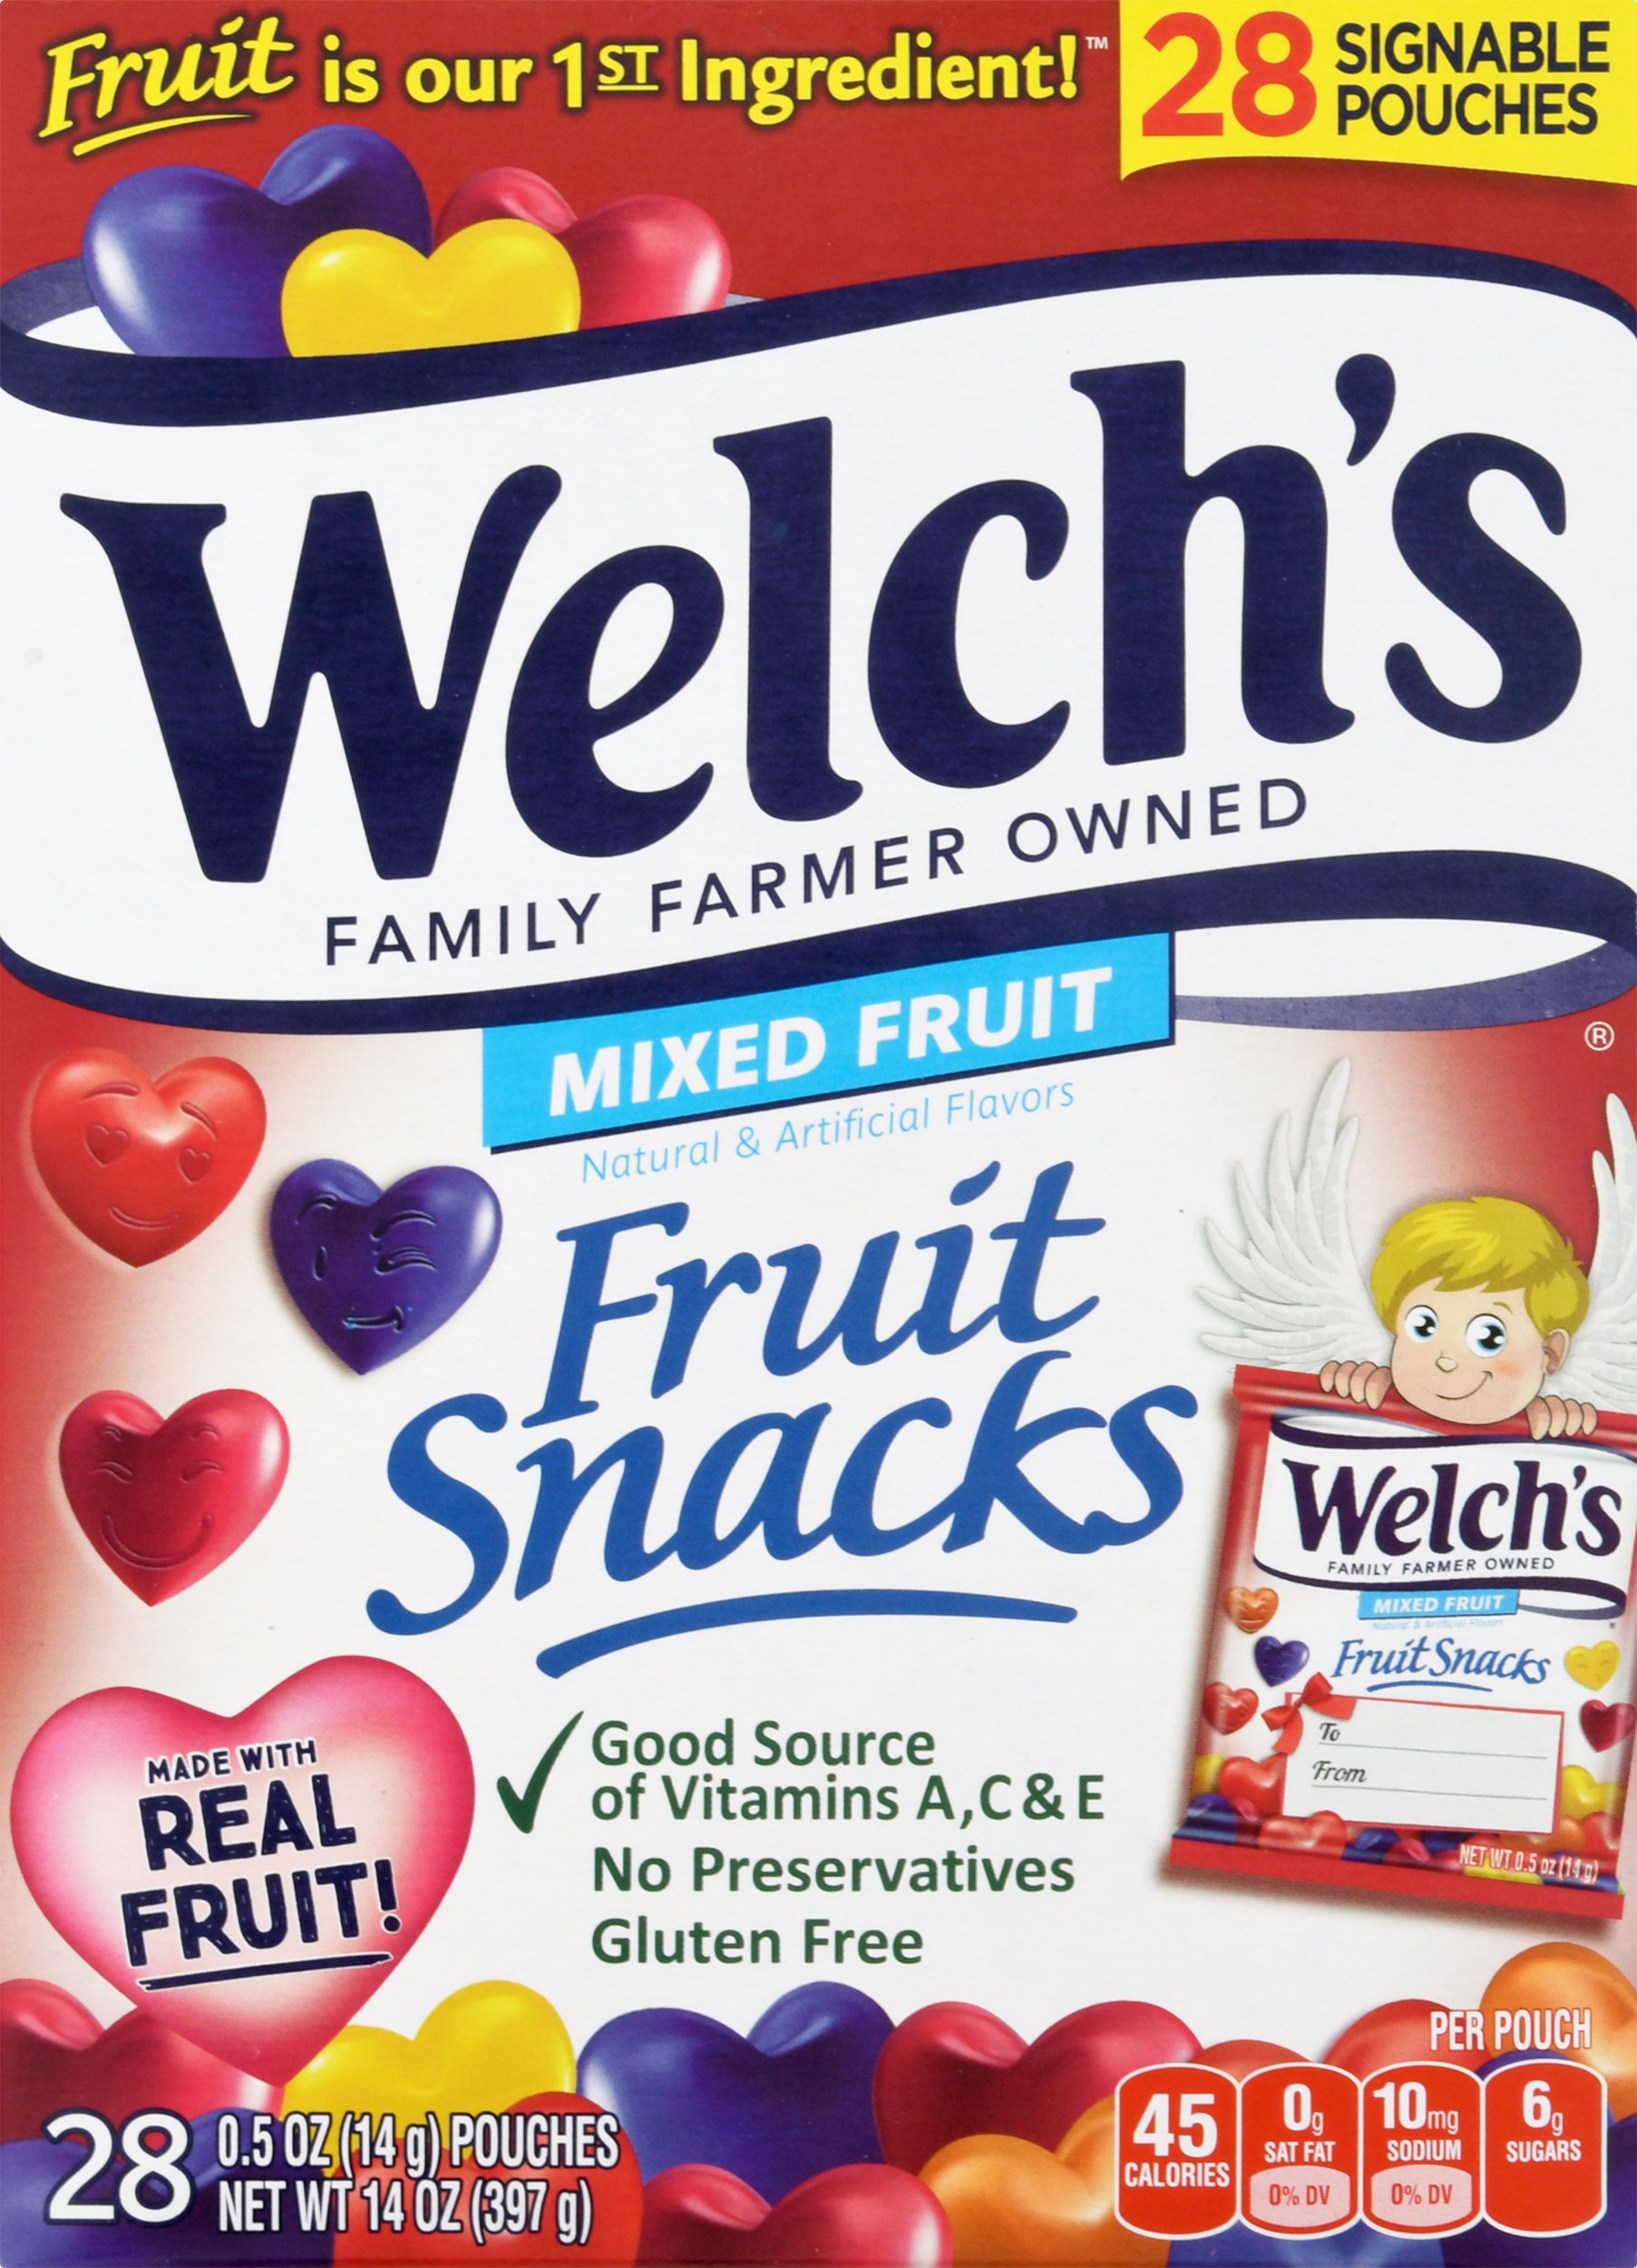 Welch's Fat-Free Mixed Fruit Snacks, 0.5 Oz., 28 Count - image 2 of 4